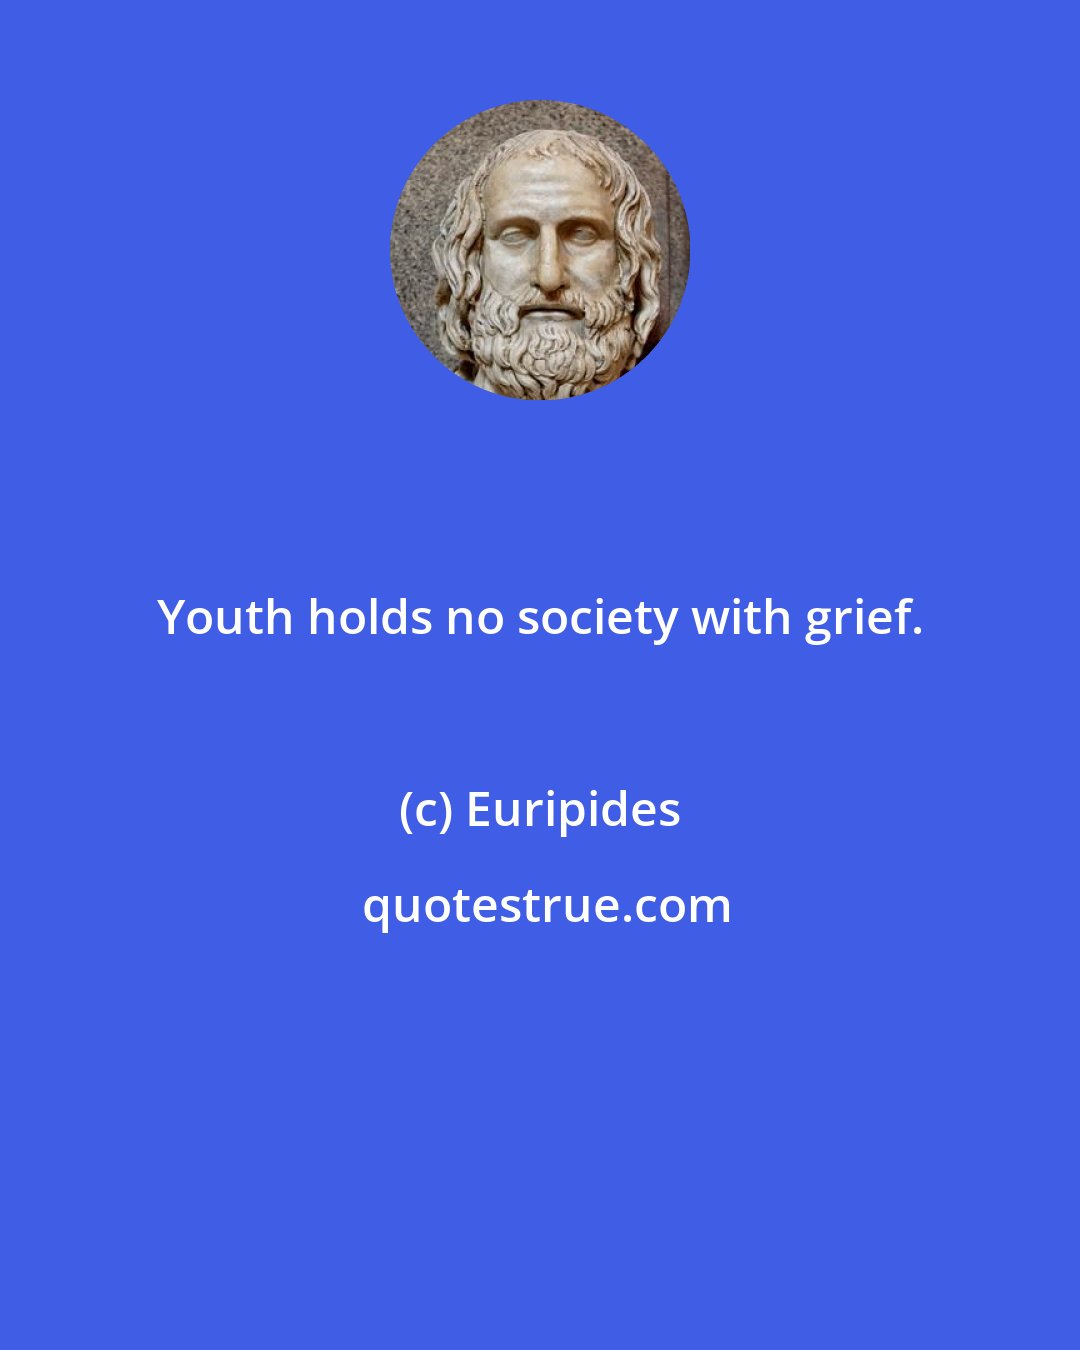 Euripides: Youth holds no society with grief.